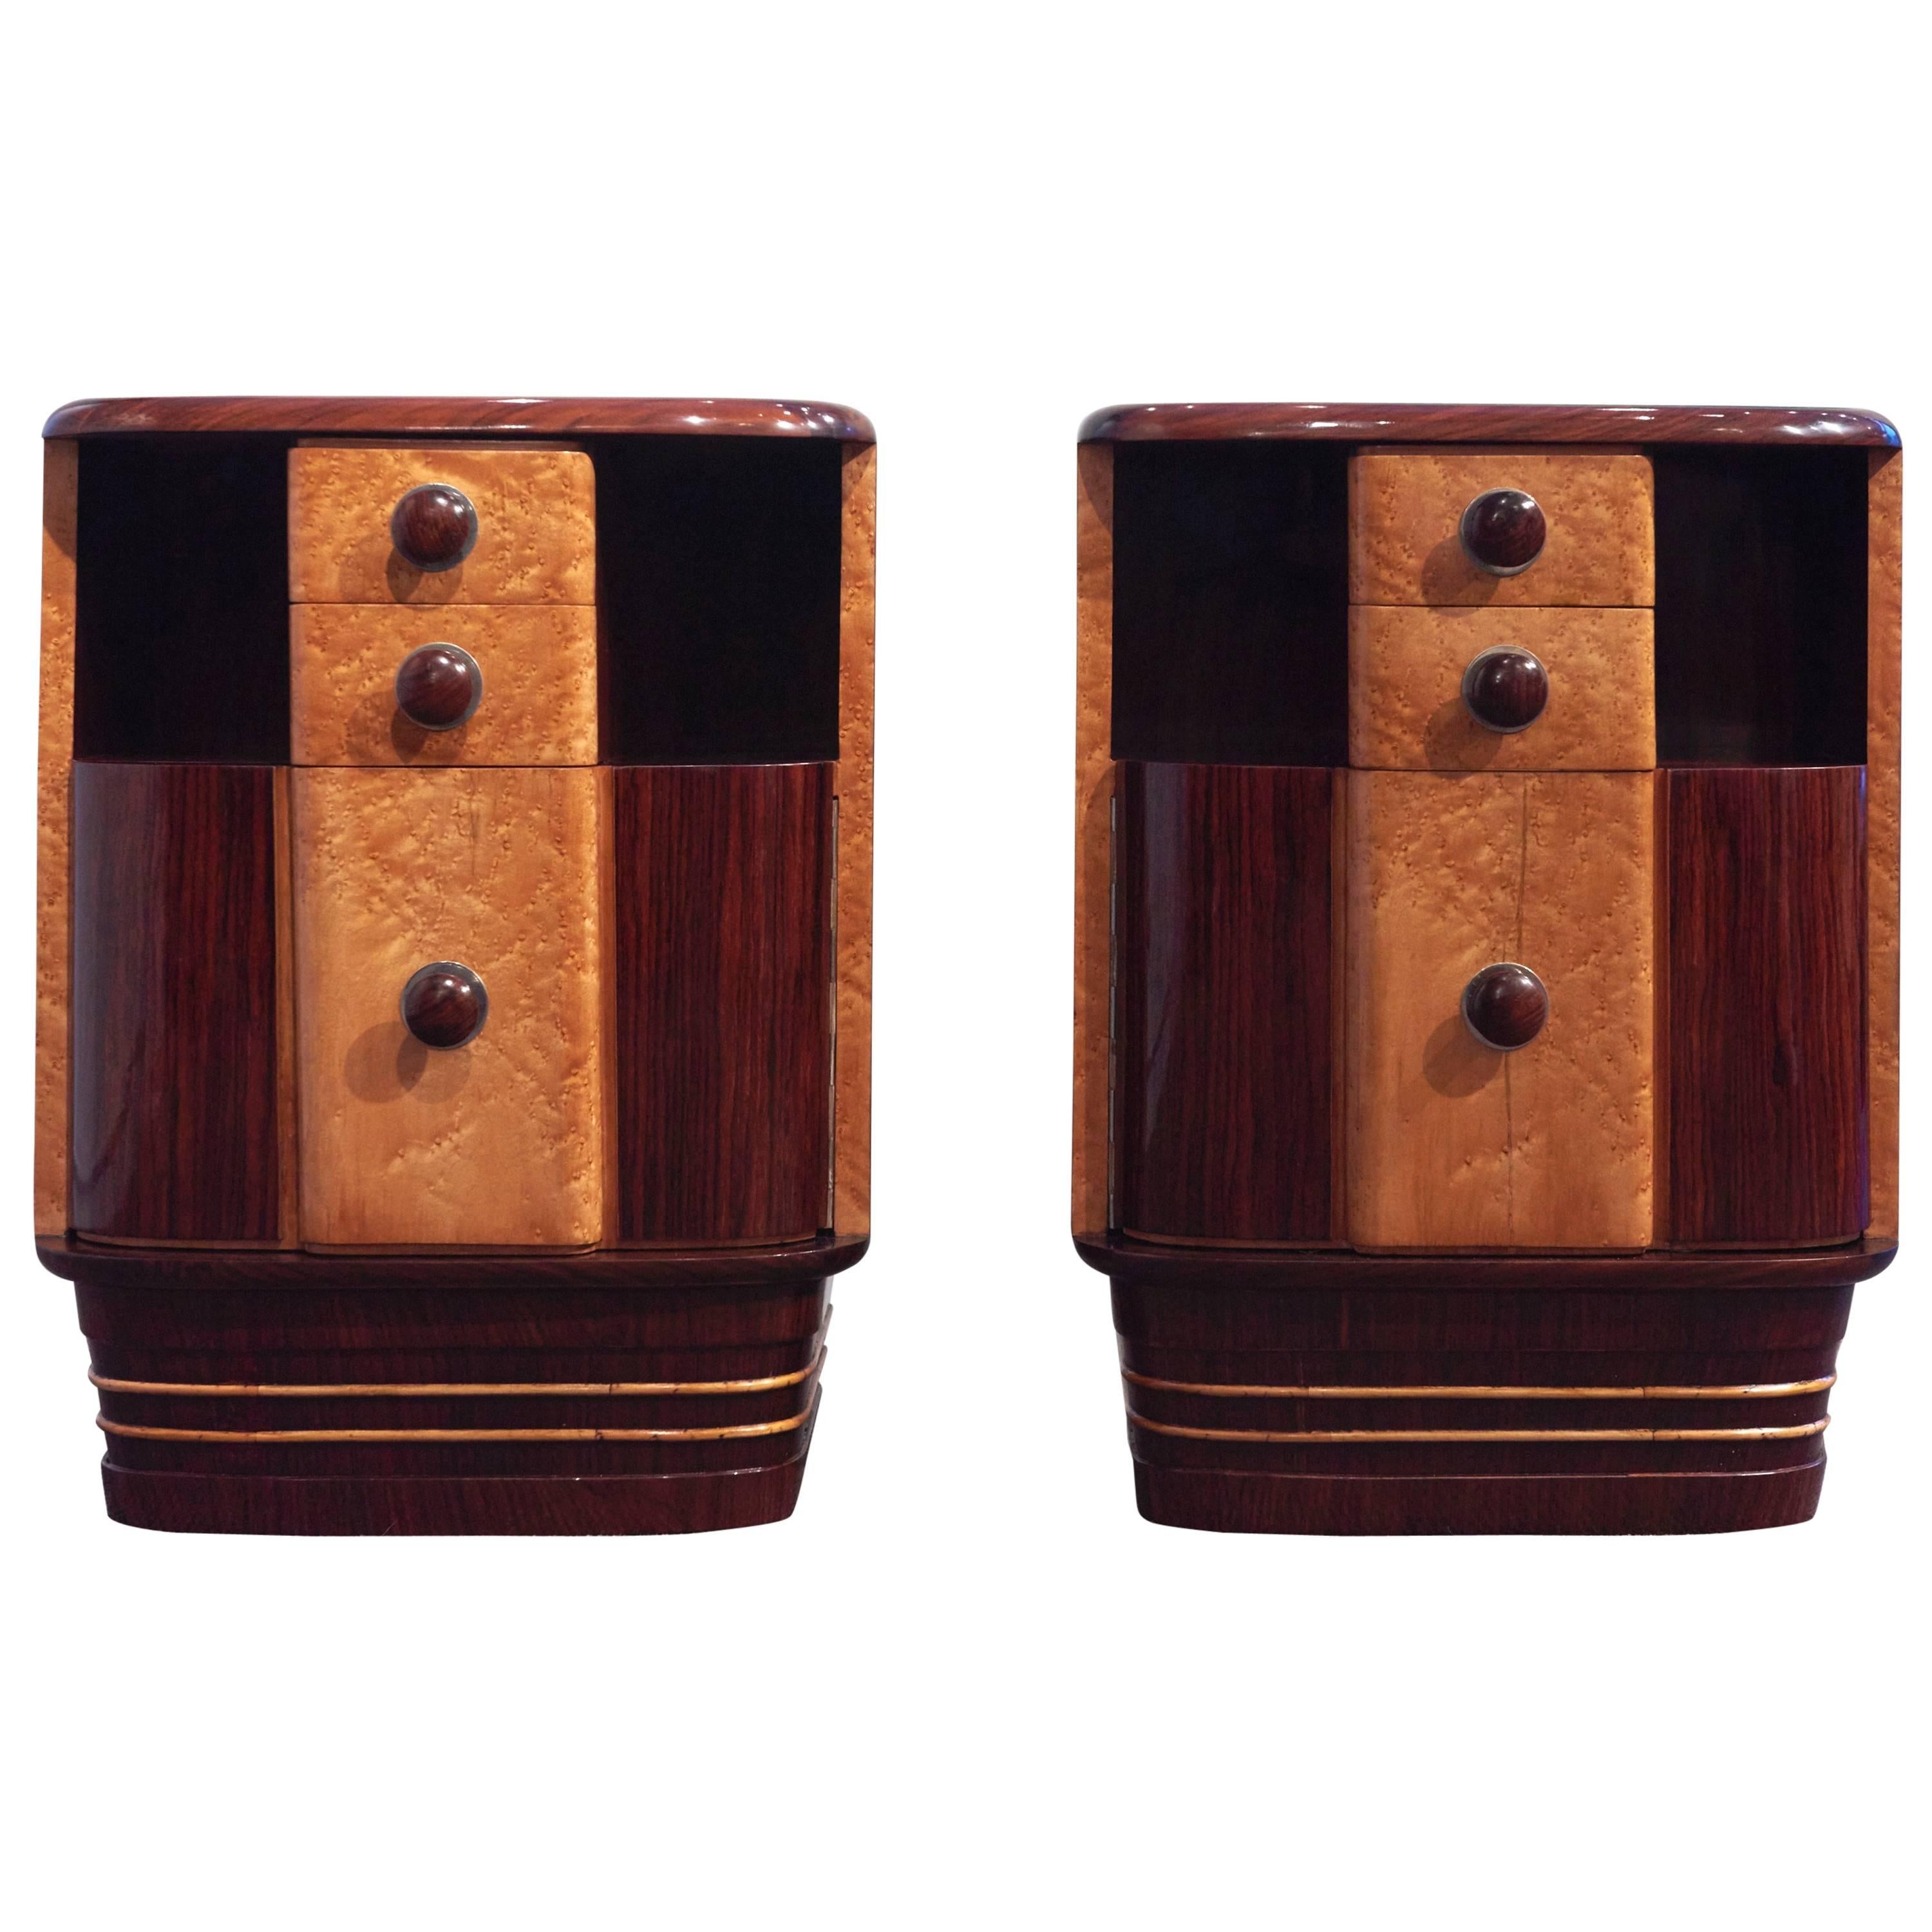 Pair of art-deco night stands